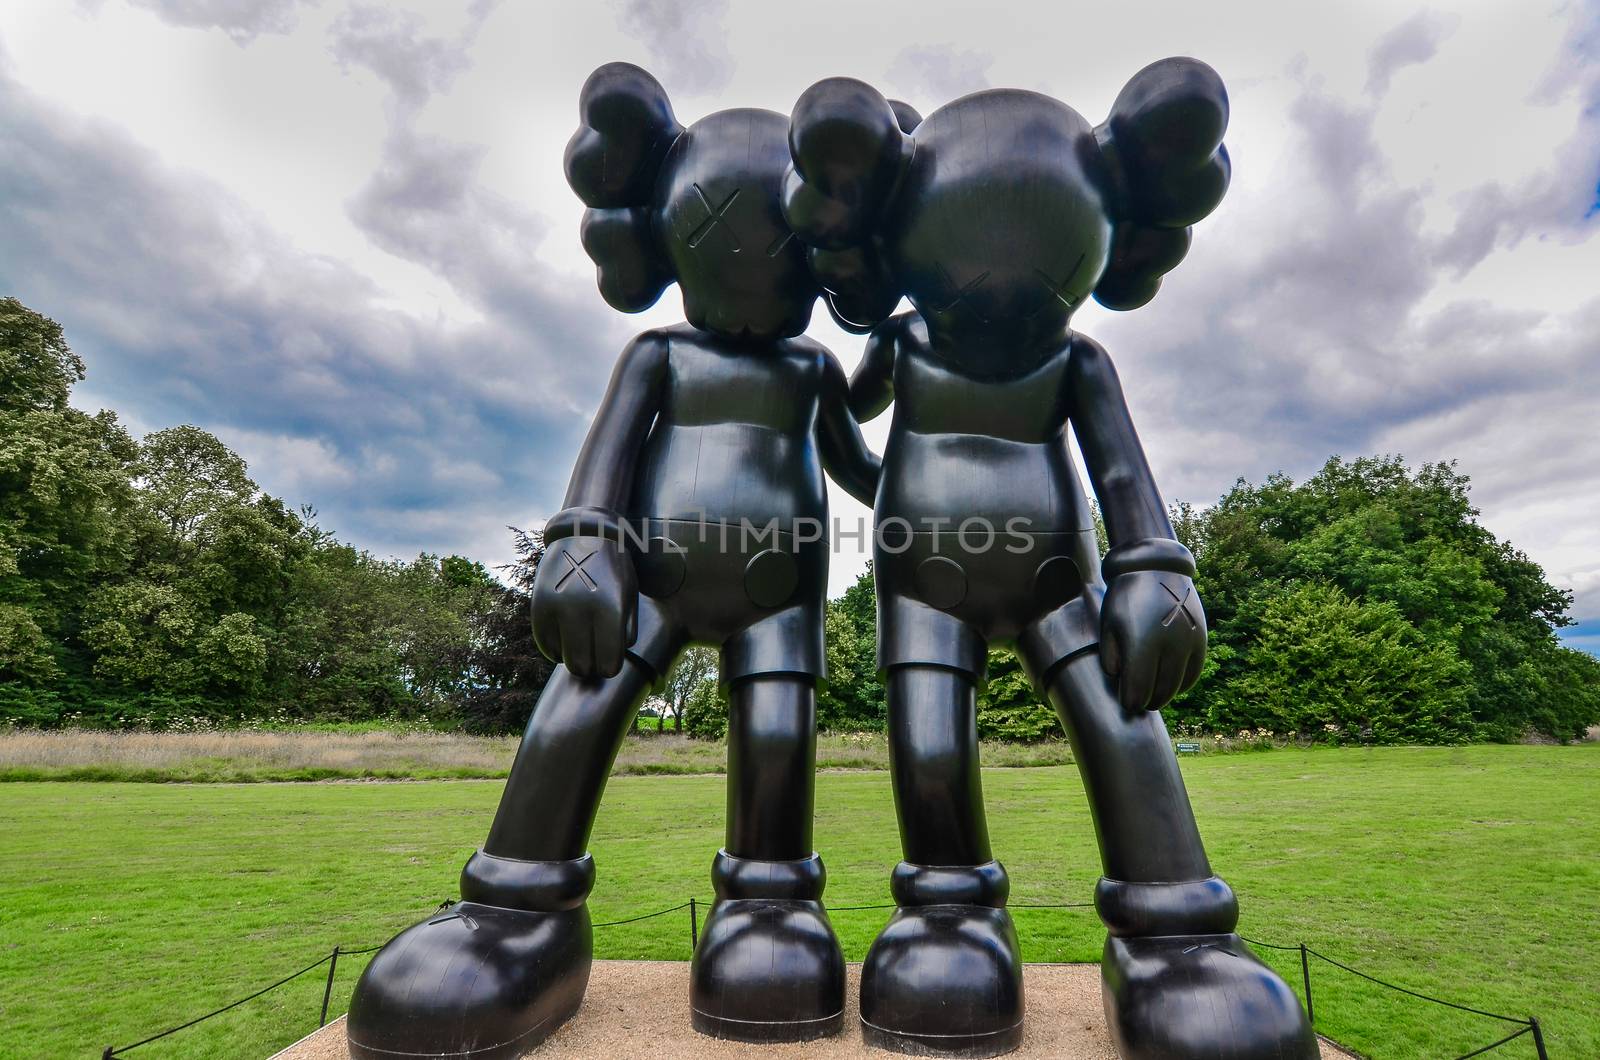 Wakefield-England July-2016 Yorkshire Sculpture Park, Internationally exhibition in the UK, This Season: "Not Vital", Editorial photo